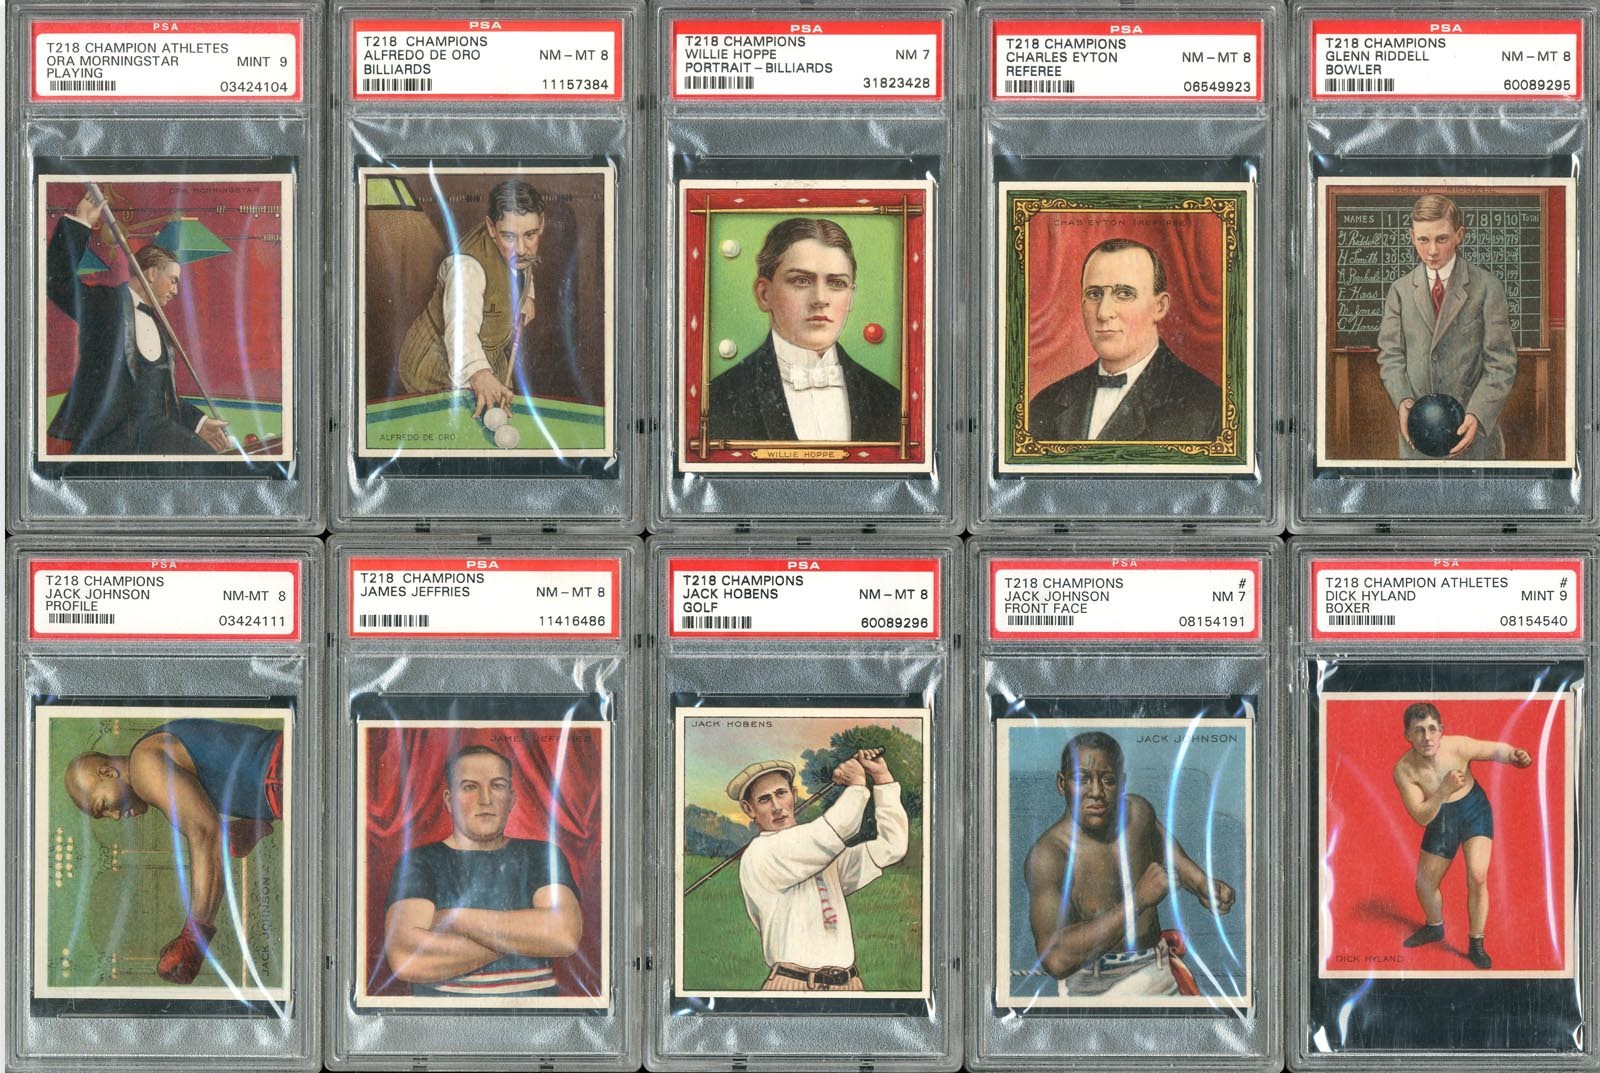 Boxing Cards - All-Time Greatest 1910 T218 Champions Complete Graded Set - #1 on PSA Registry (8.02 GPA)